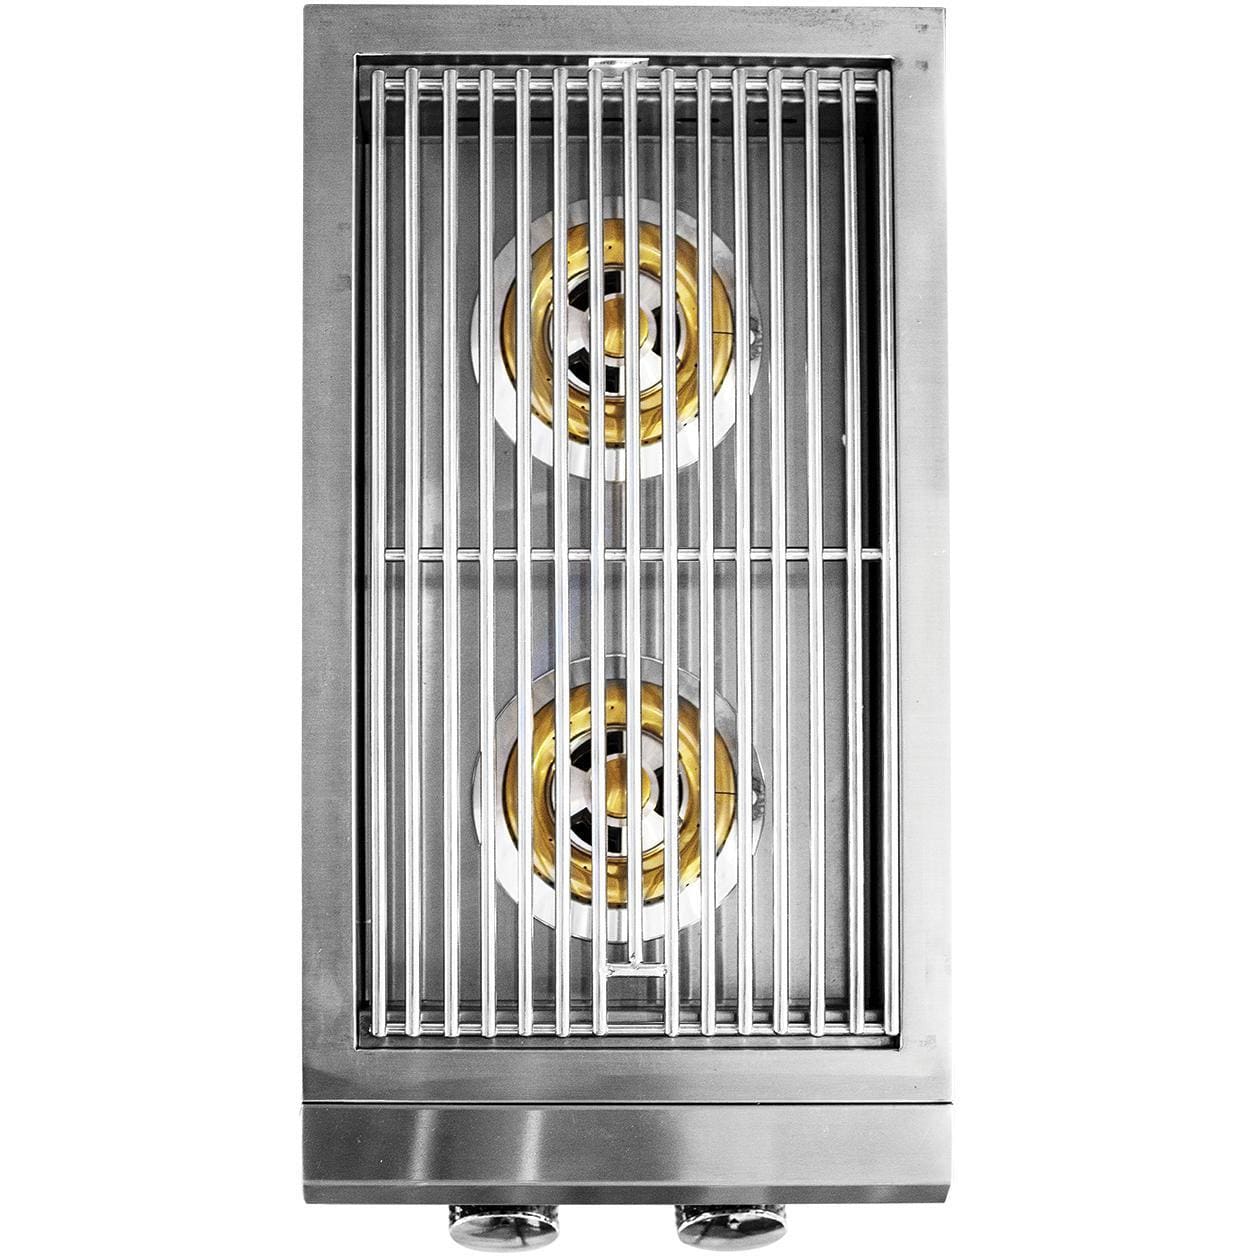 Summerset Grills Side Burners Side Burner LP - Sizzler Pro Double with LED Illumination - Built-in